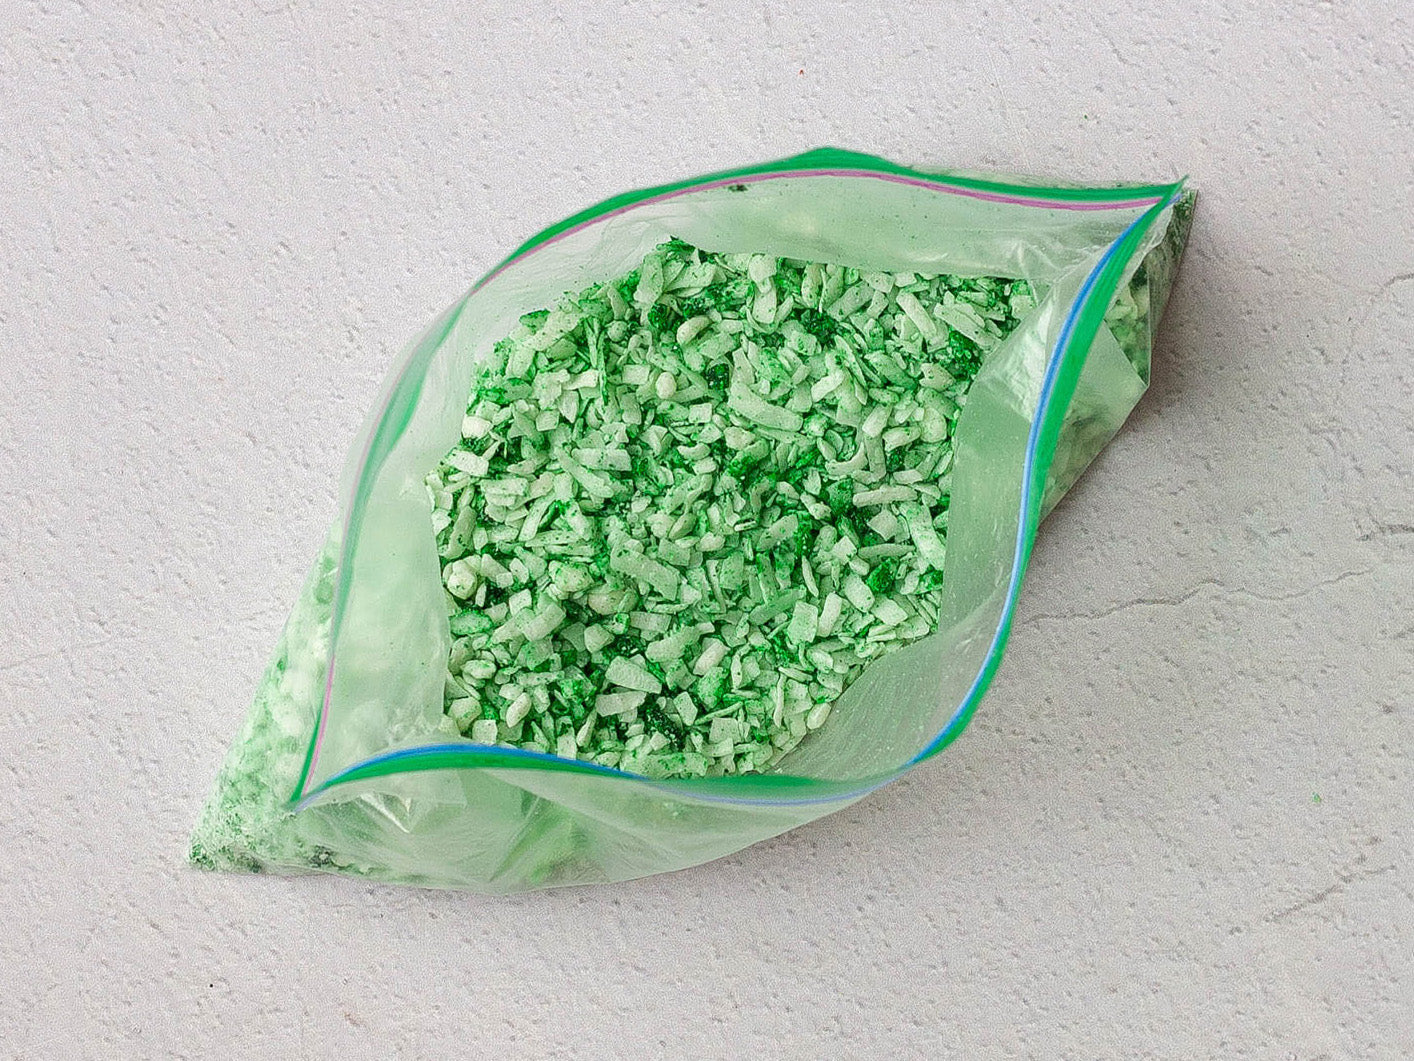 Shredded coconut colored with green food coloring